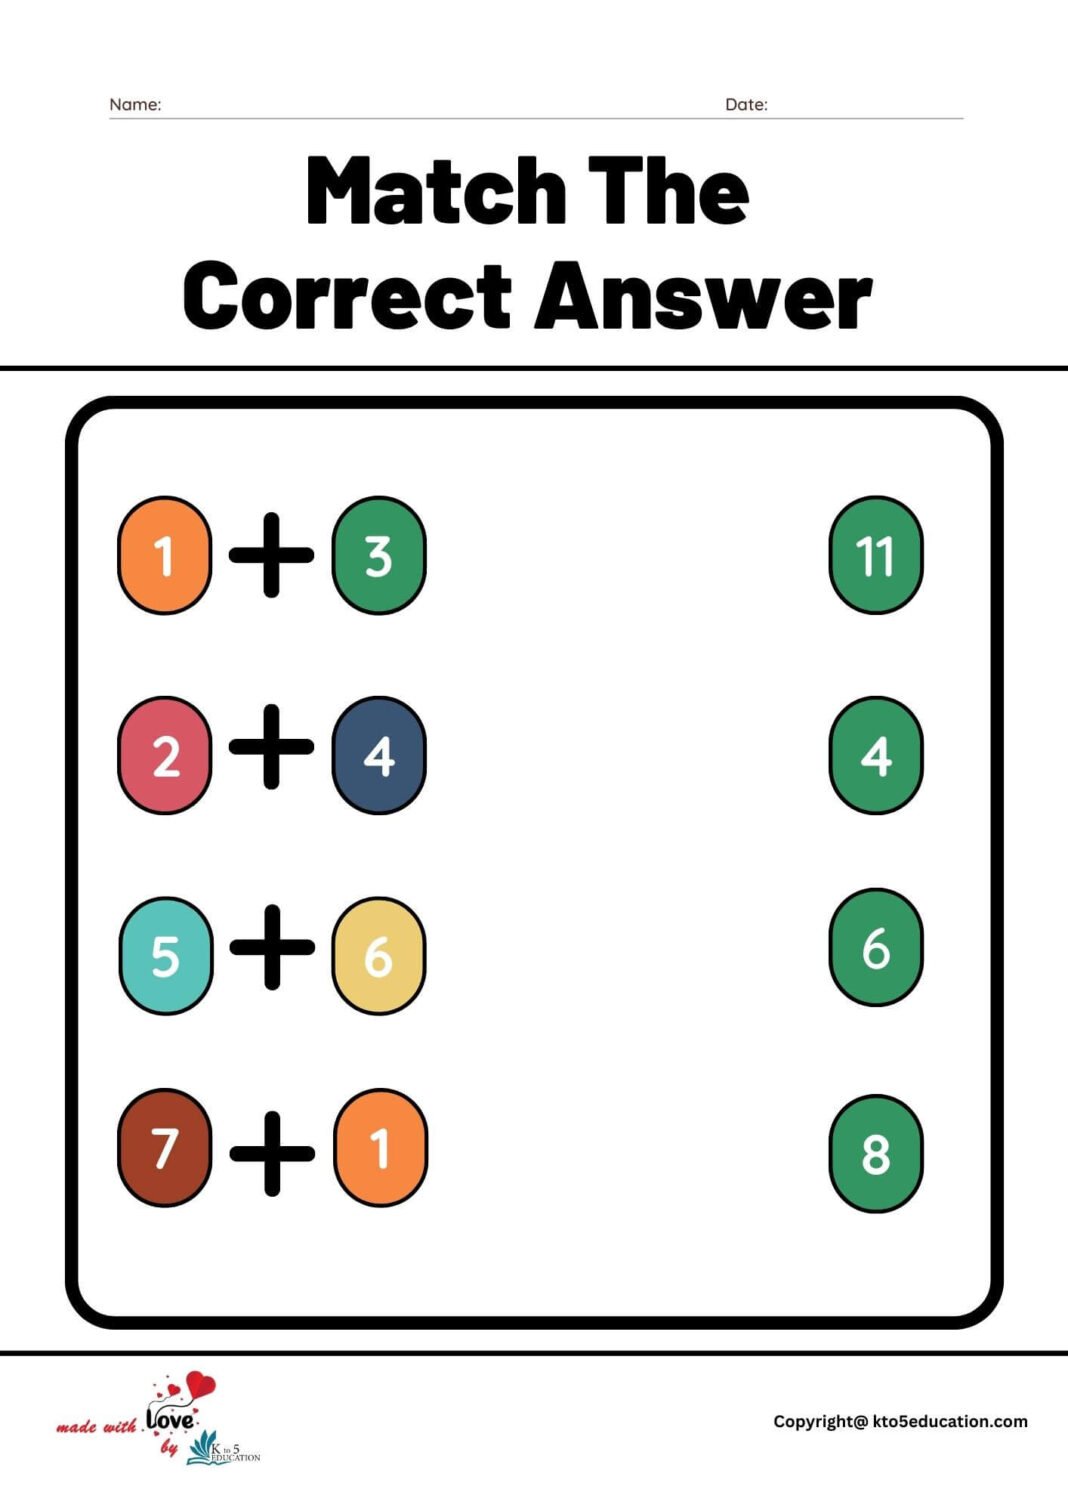 match-the-correct-answer-worksheet-free-download